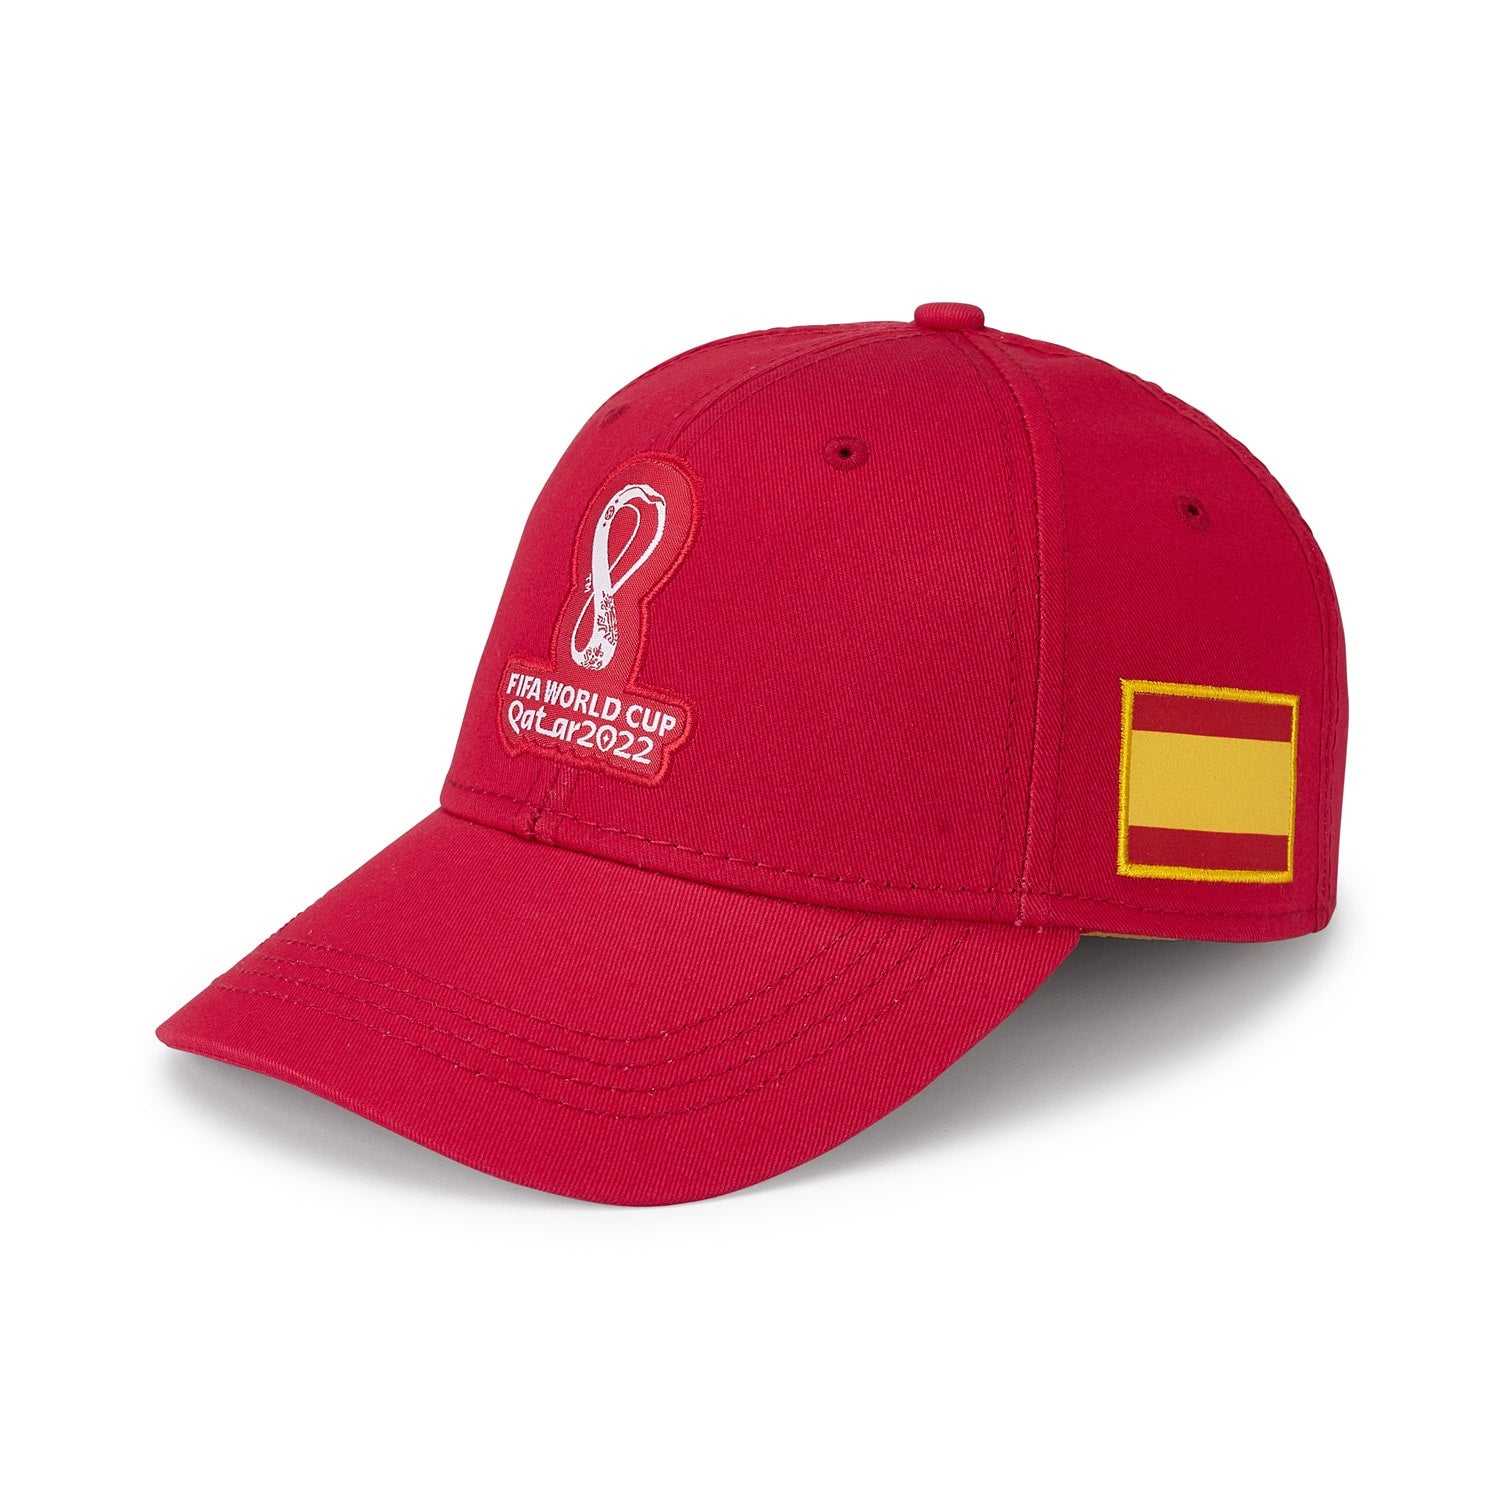 2022 World Cup Spain Red Cap - Mens